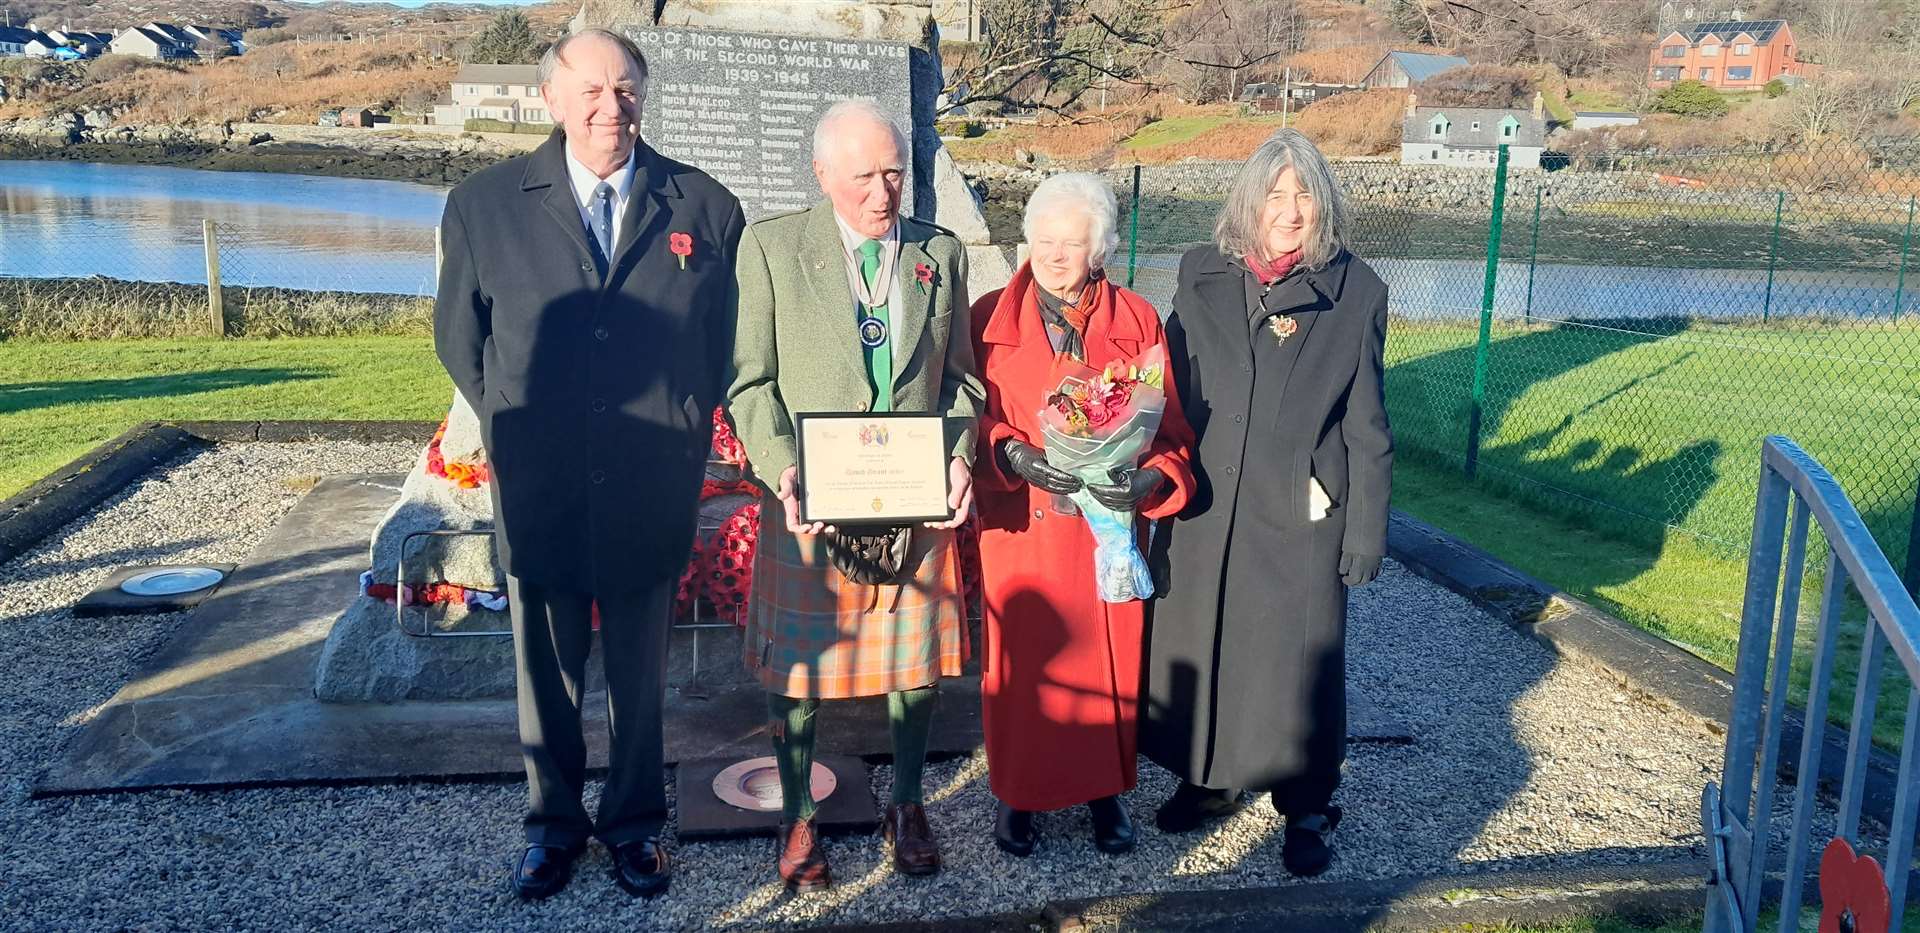 Retiring Deputy Lieutenant David Grant and his wife Norah were presented with a framed certificate and a bouquet of flowers by RBLS Assynt branch chairman Dr John Morgan and his wife Janet.